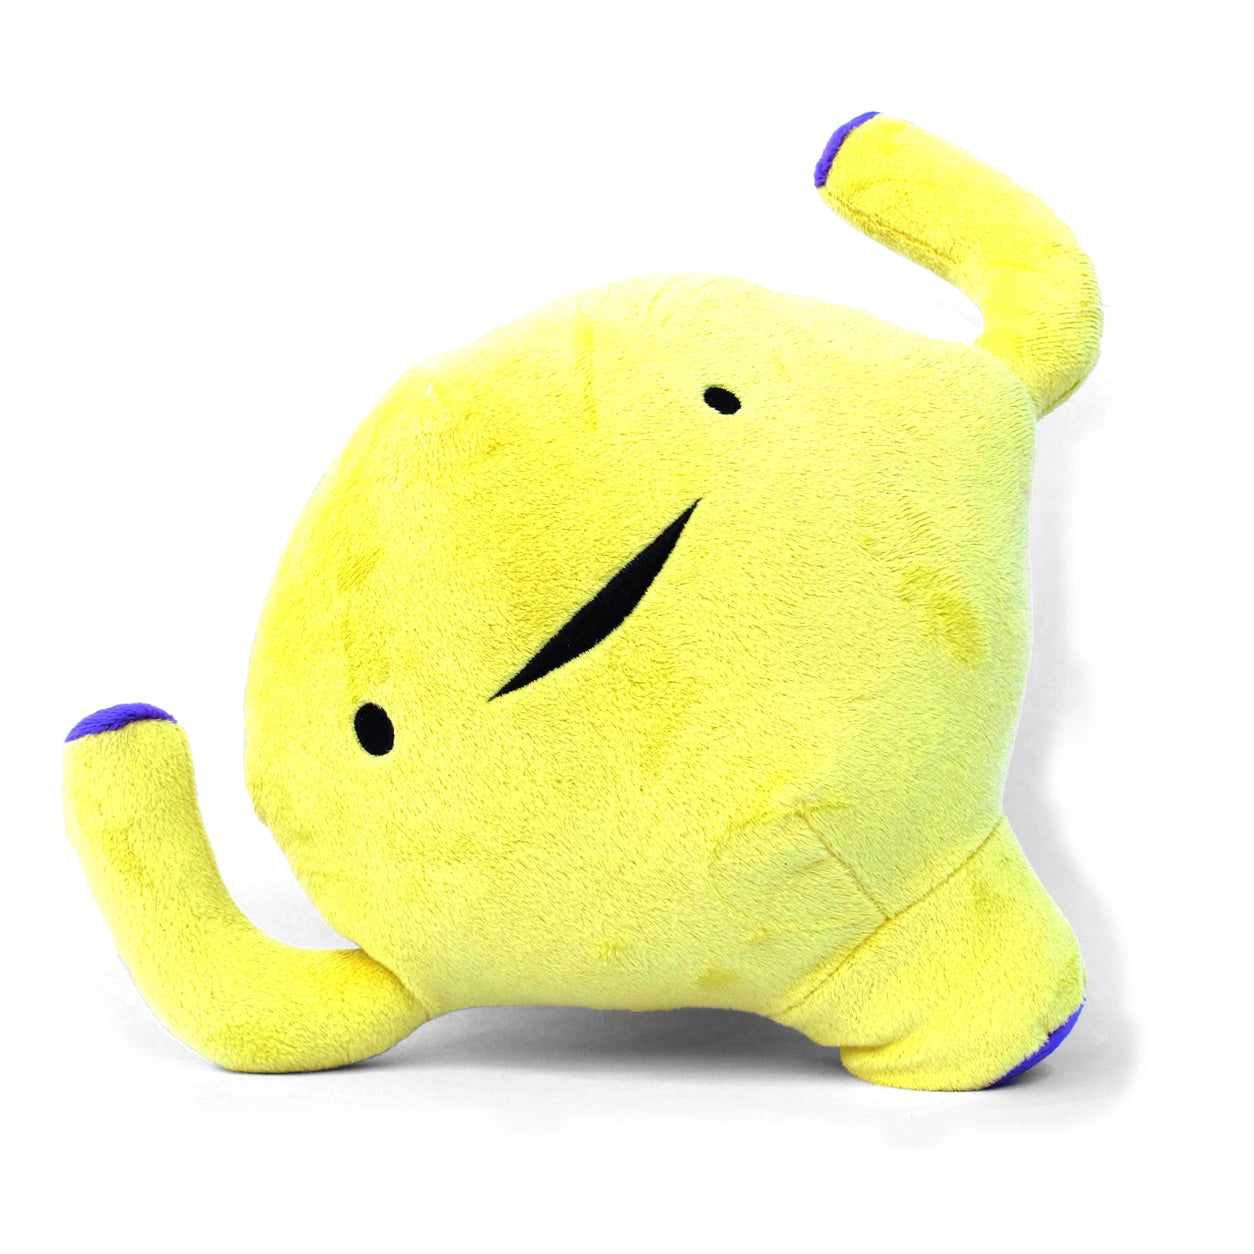 plushie bladder - Don't stop relieving